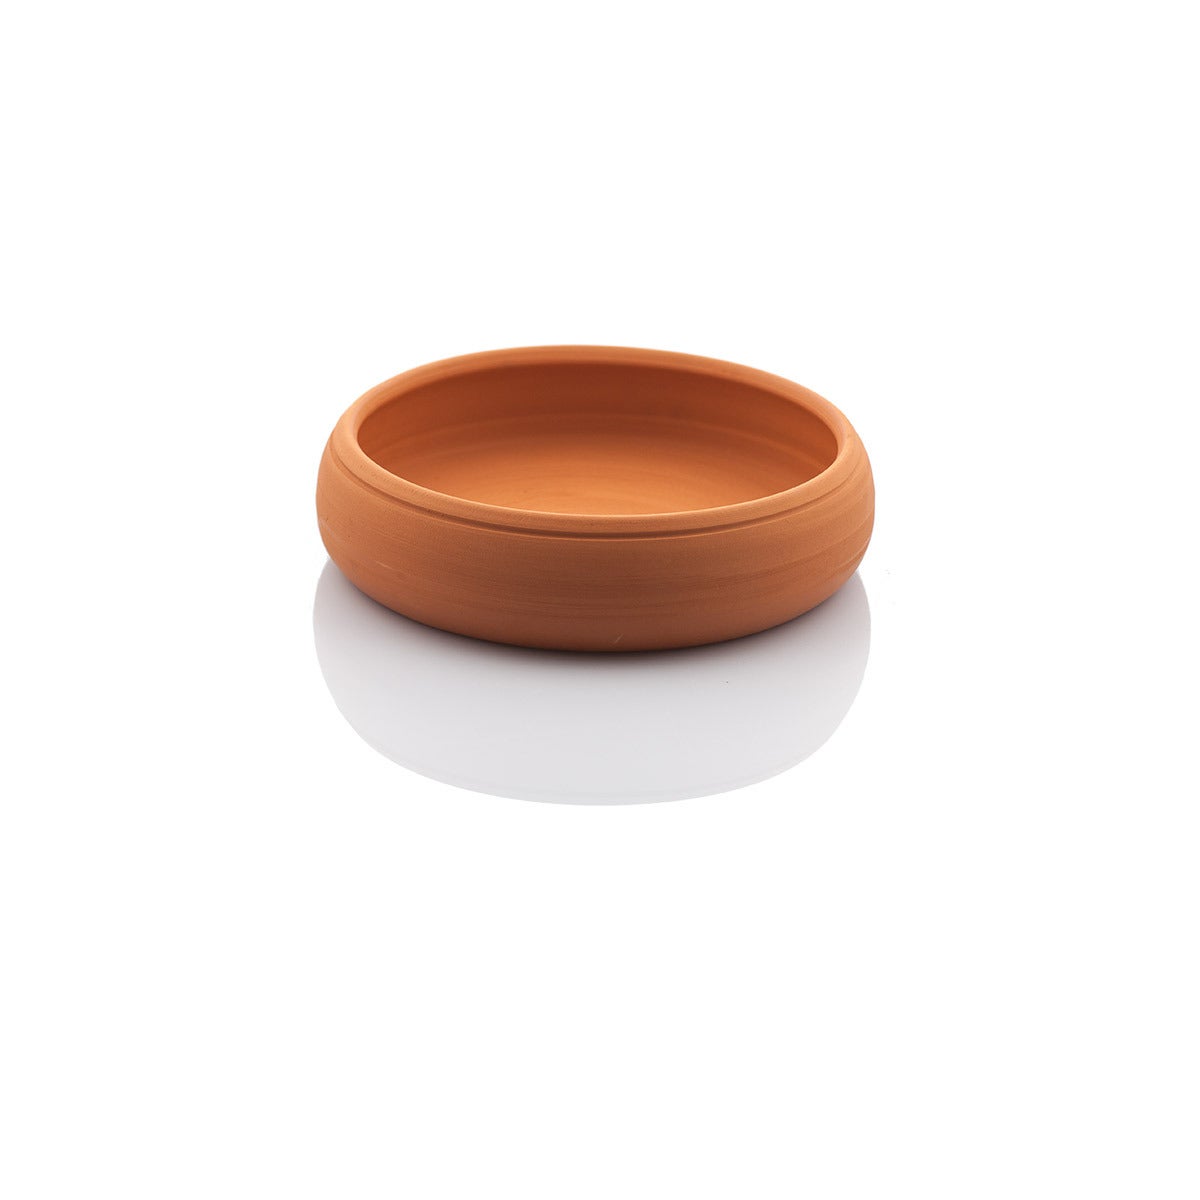 ROUND OVEN TRAY, 30x8 CM, (NATURAL-TERRACOTTA) 1 PCS, SHRINK